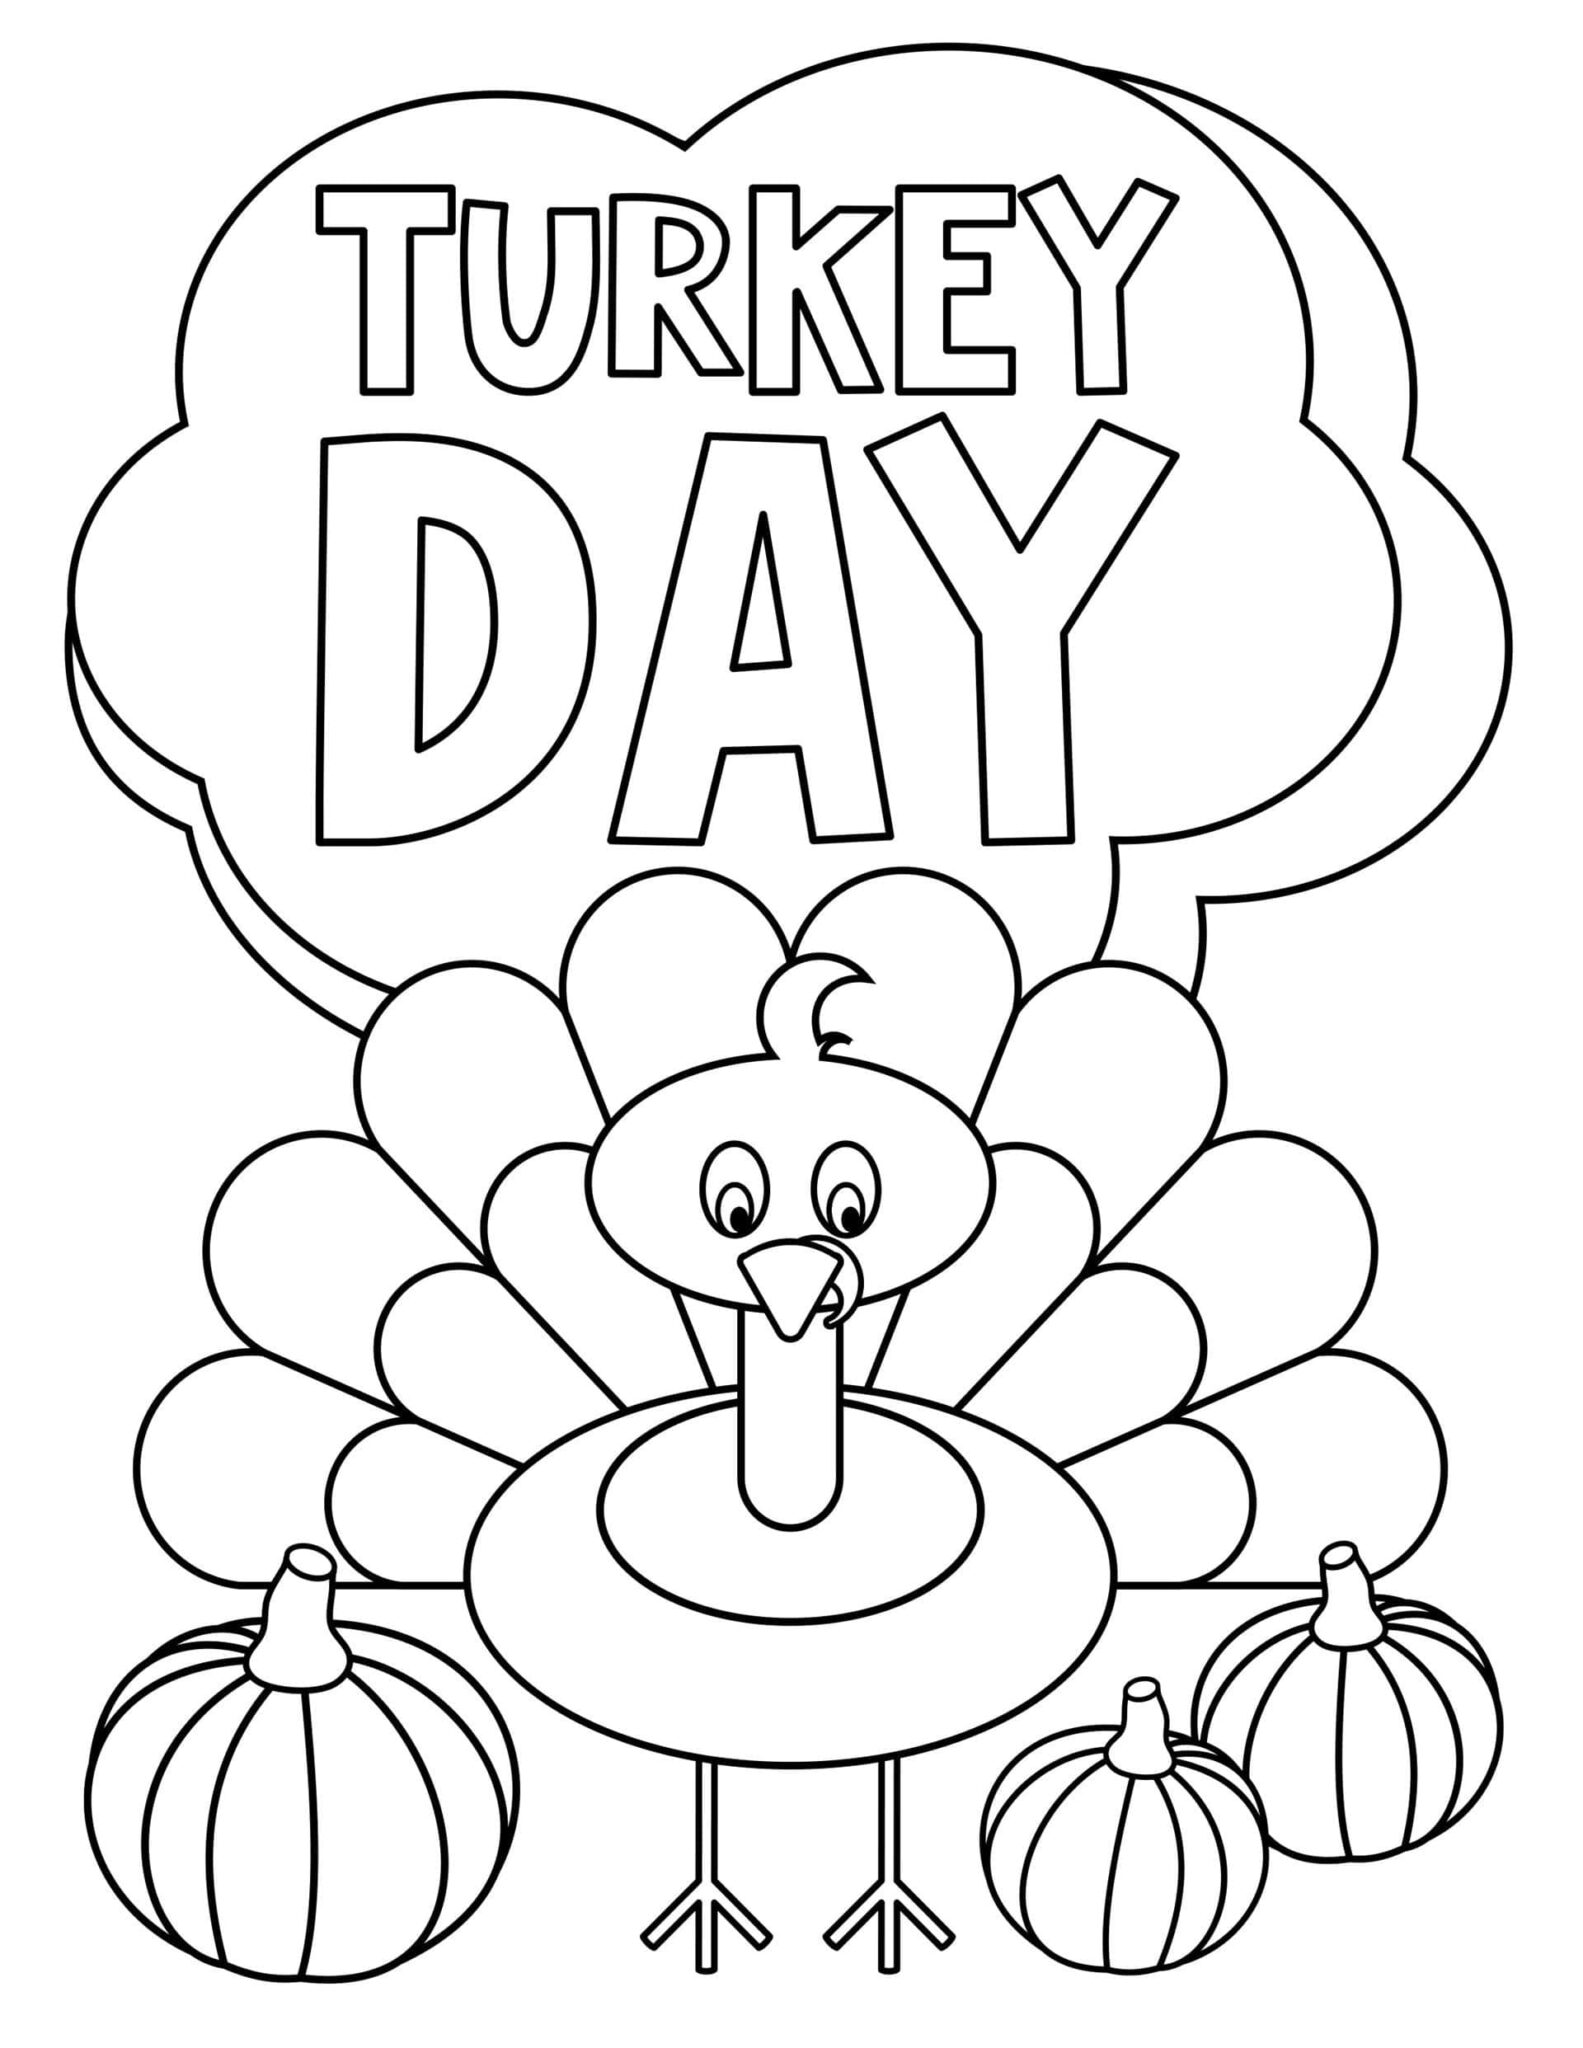 Thanksgiving Coloring Pages 2022 – Free Thanksgiving Coloring Pages